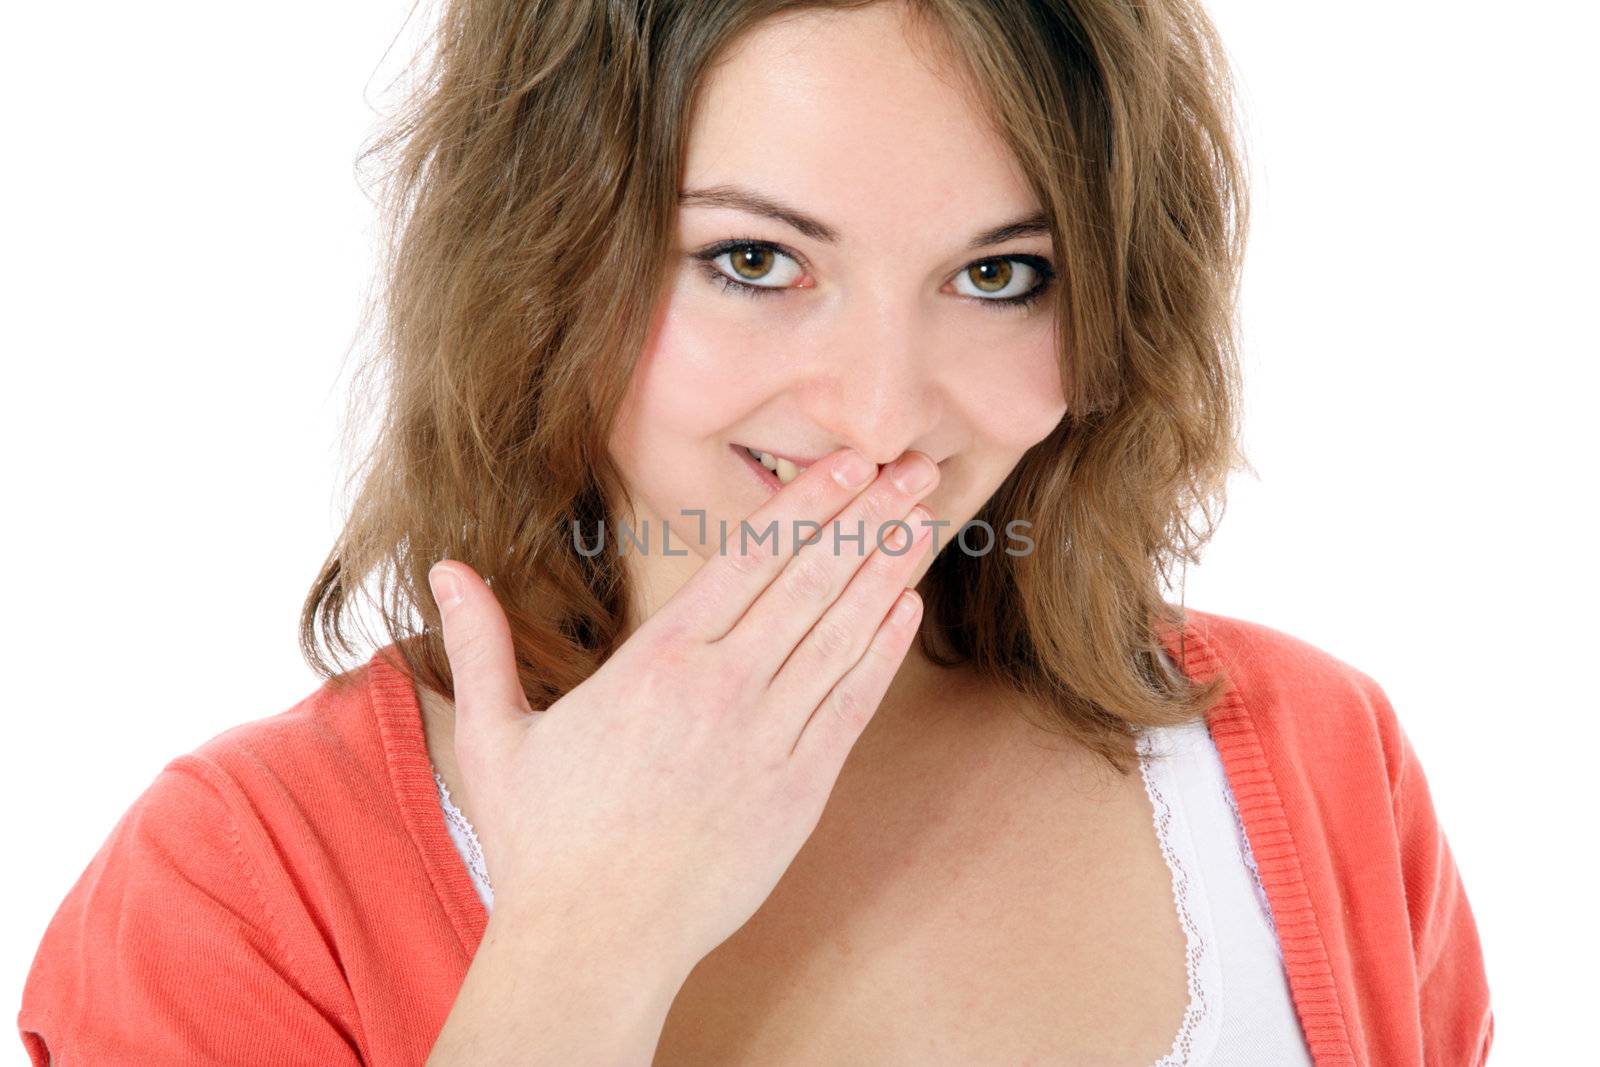 Shy young woman. All on white background.